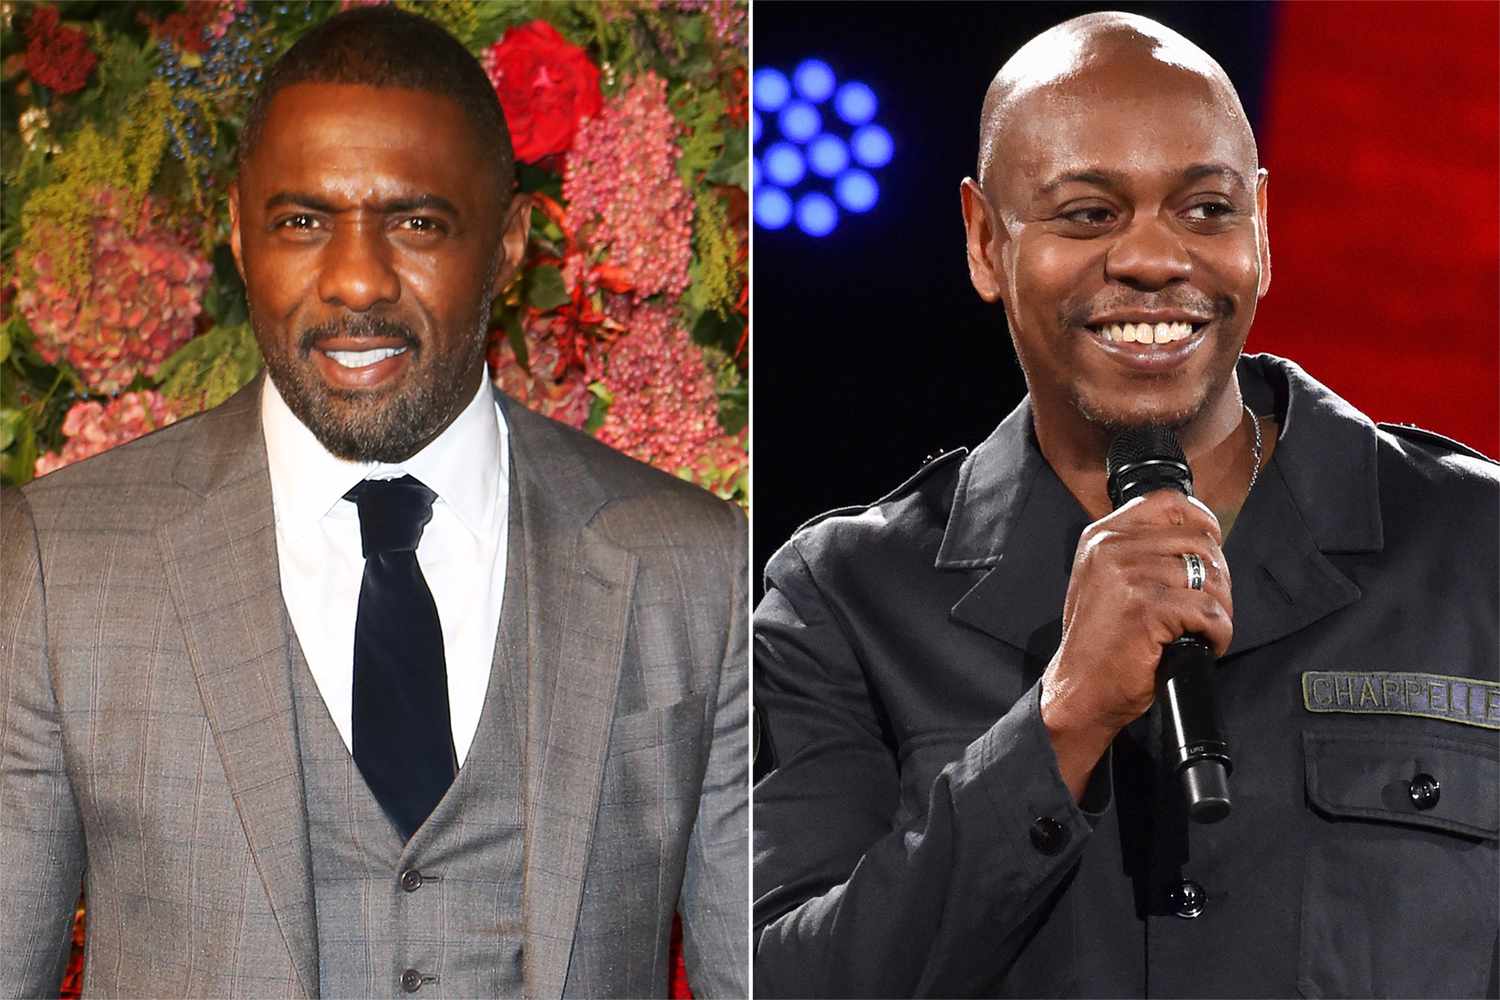 Idris Elba and Dave Chappelle